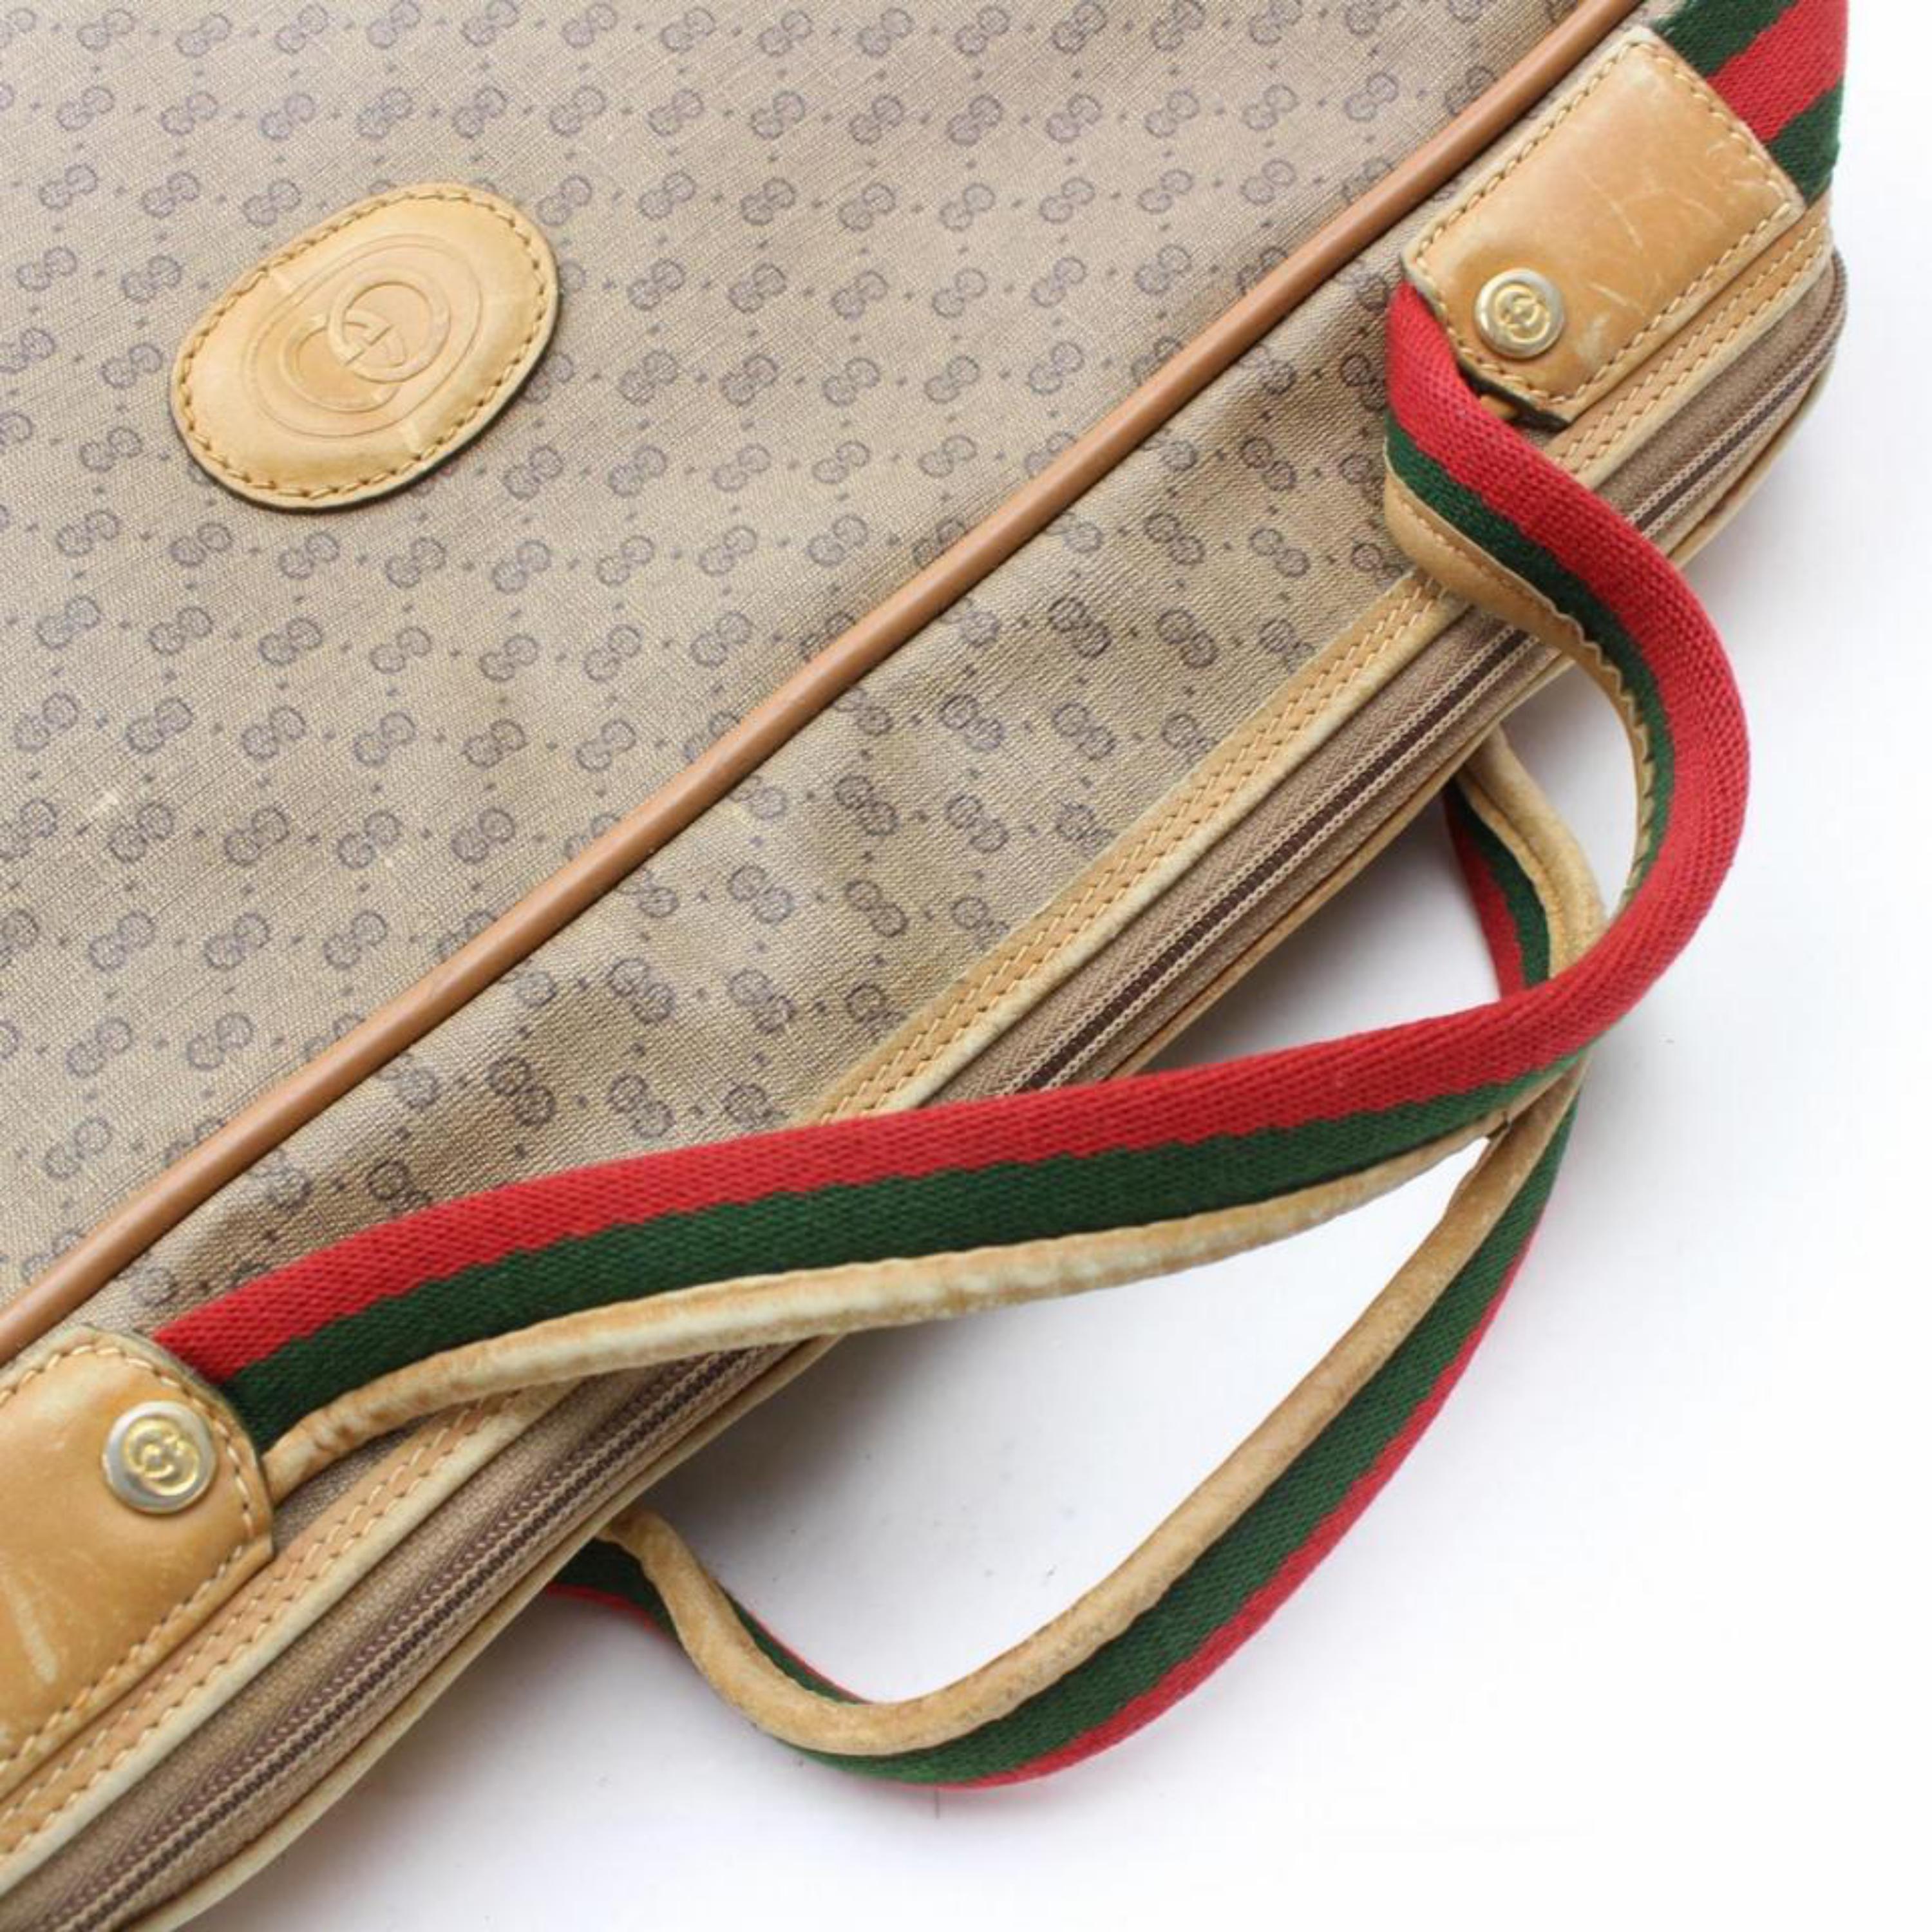 Gucci Boston Sherry Monogram Web Suitcase 869496 Brown Coated Canvas Weekend/Tra In Good Condition For Sale In Forest Hills, NY